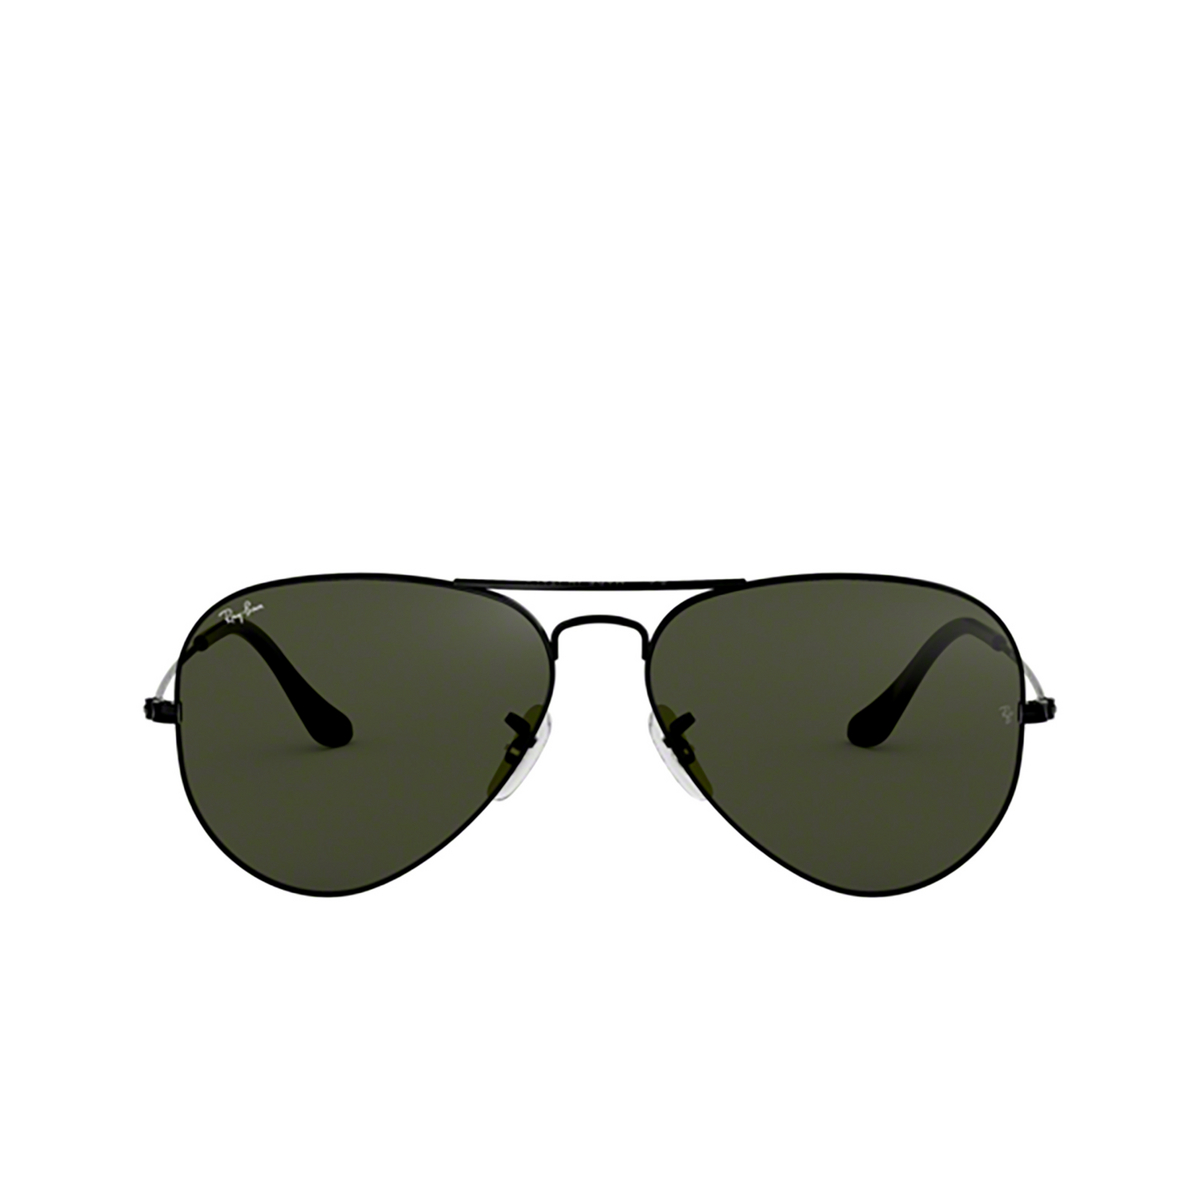 Ray-Ban AVIATOR LARGE METAL Sunglasses L2823 Black - front view